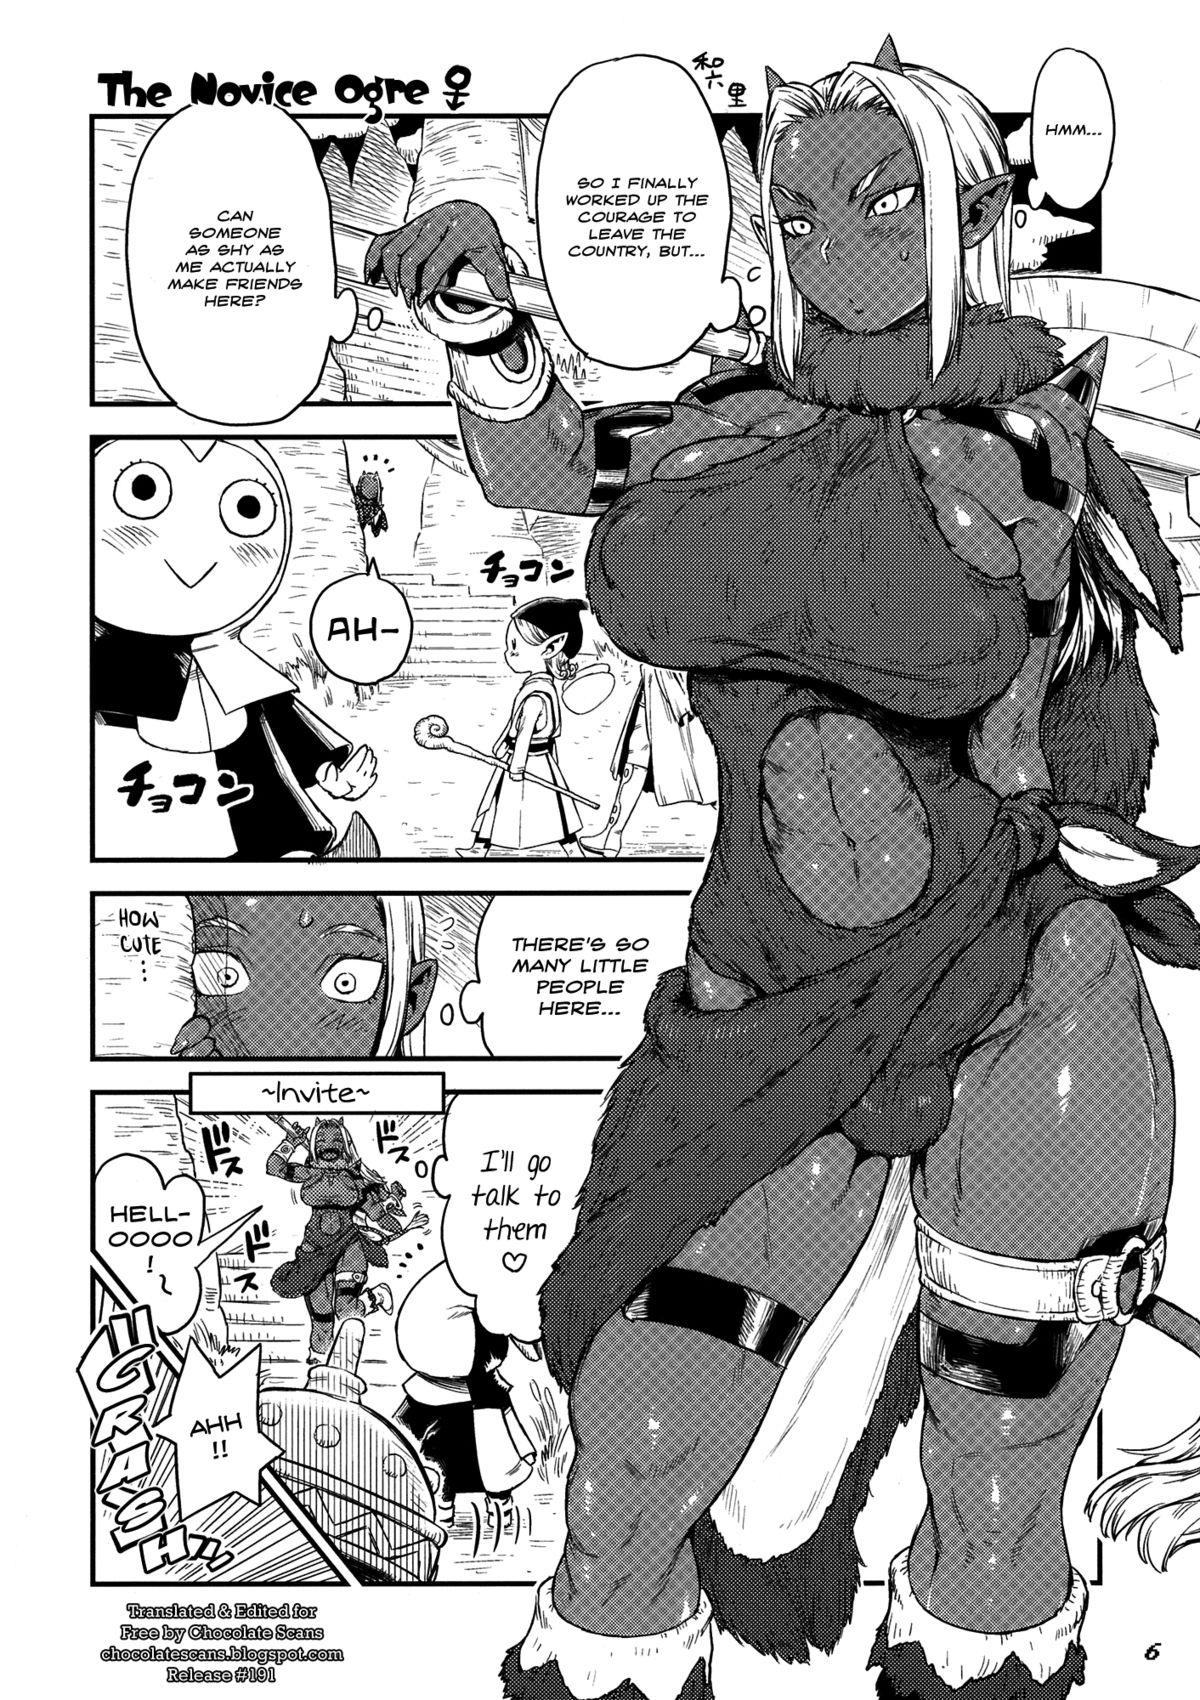 Ass Licking Manya & Ogre FPS β - Dragon quest x Celeb - Page 6